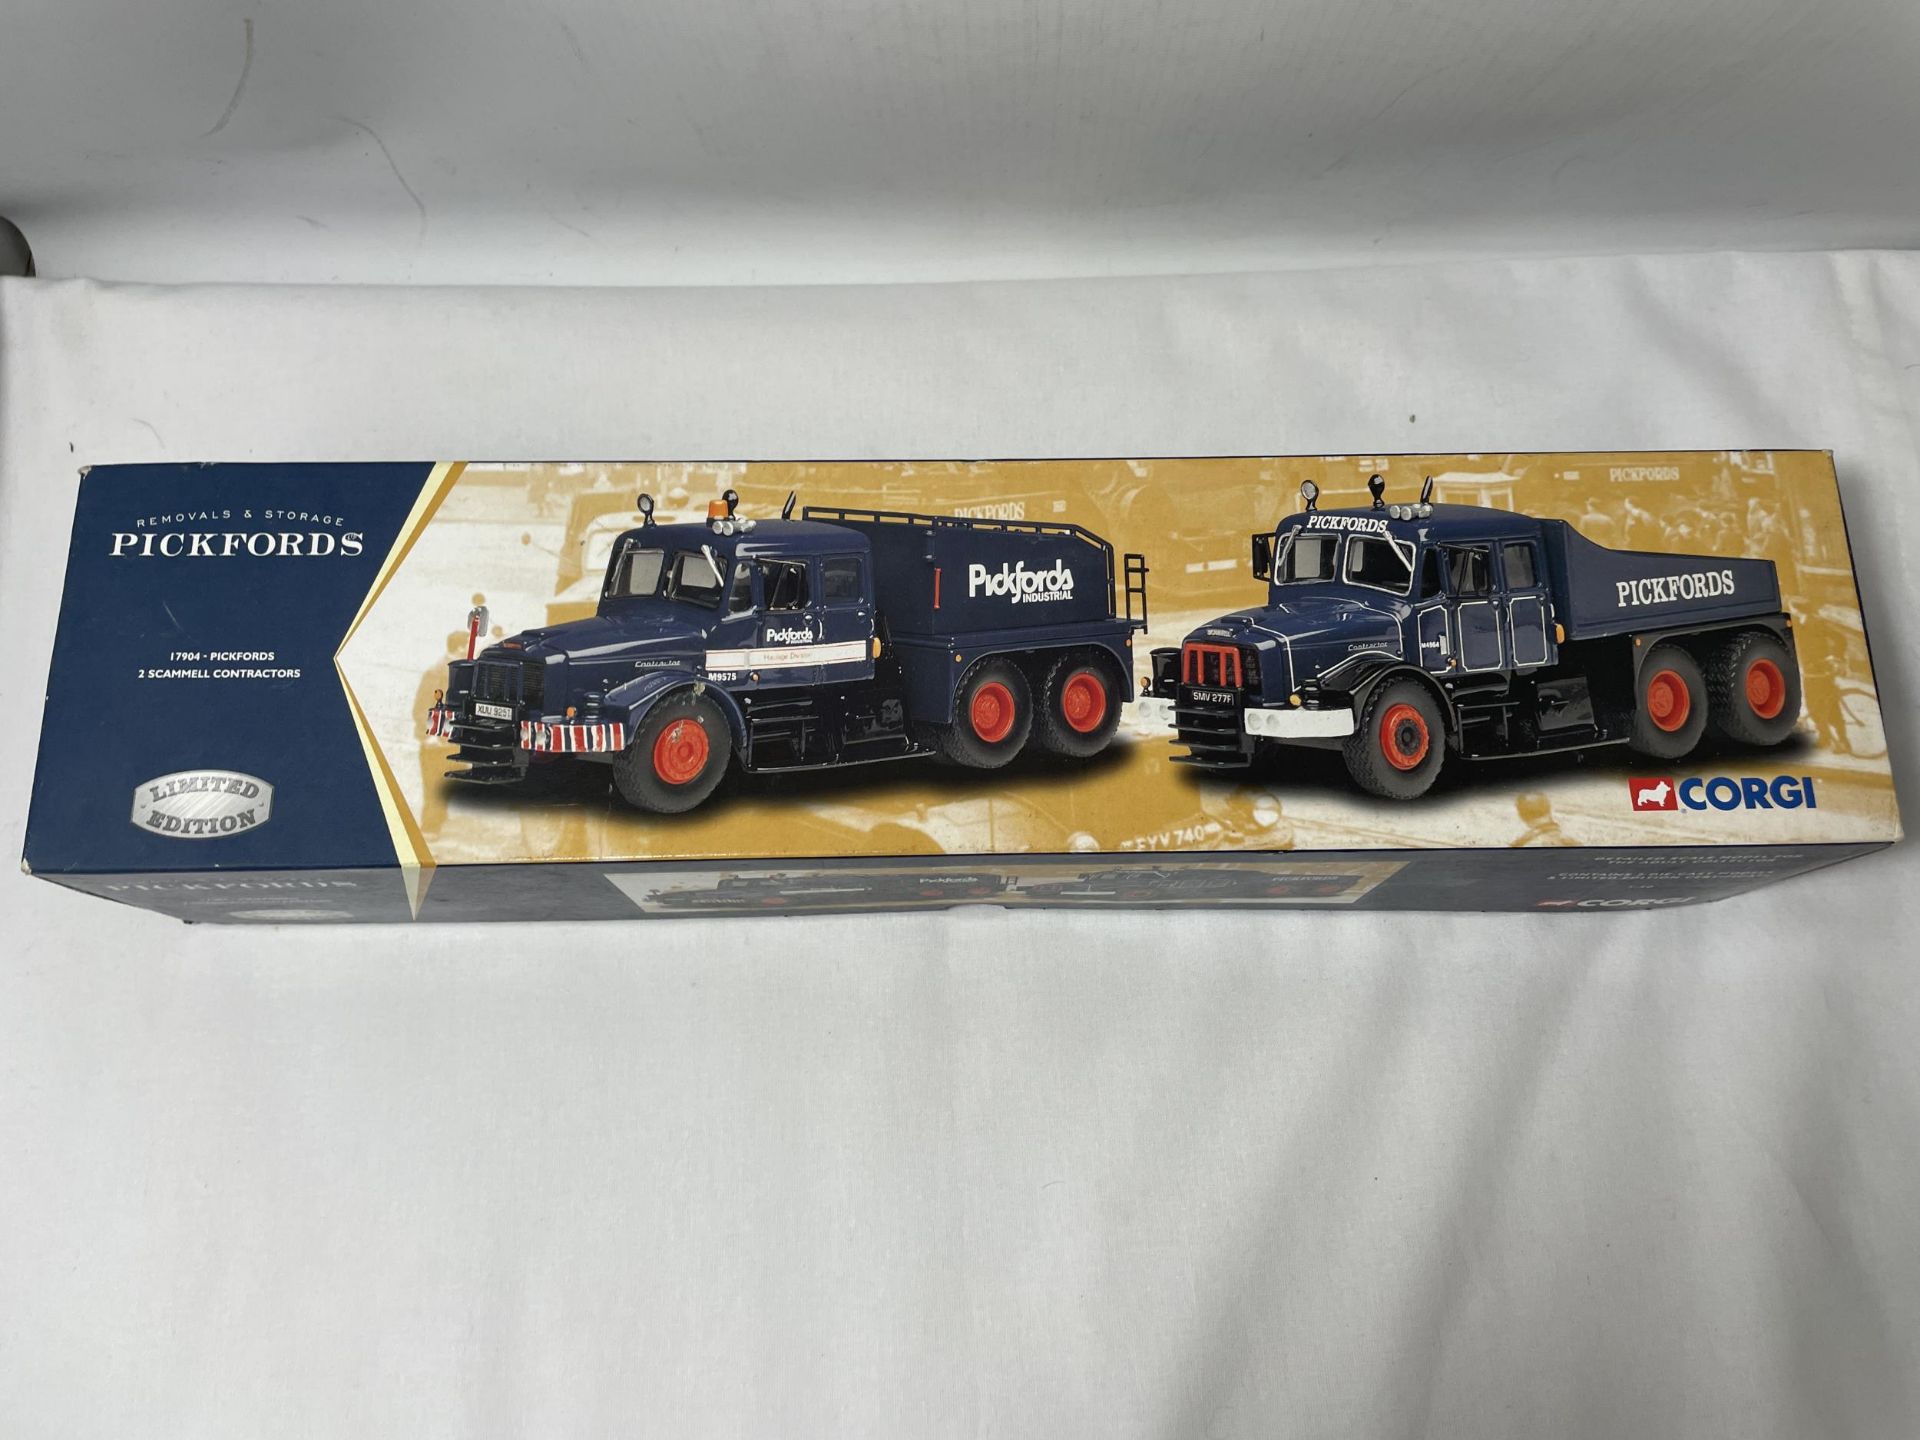 A BOXED CORGI LIMITED EDITION, 1/50 SCALE, TWO SCAMMELL CONTRACTORS - PICKFORDS